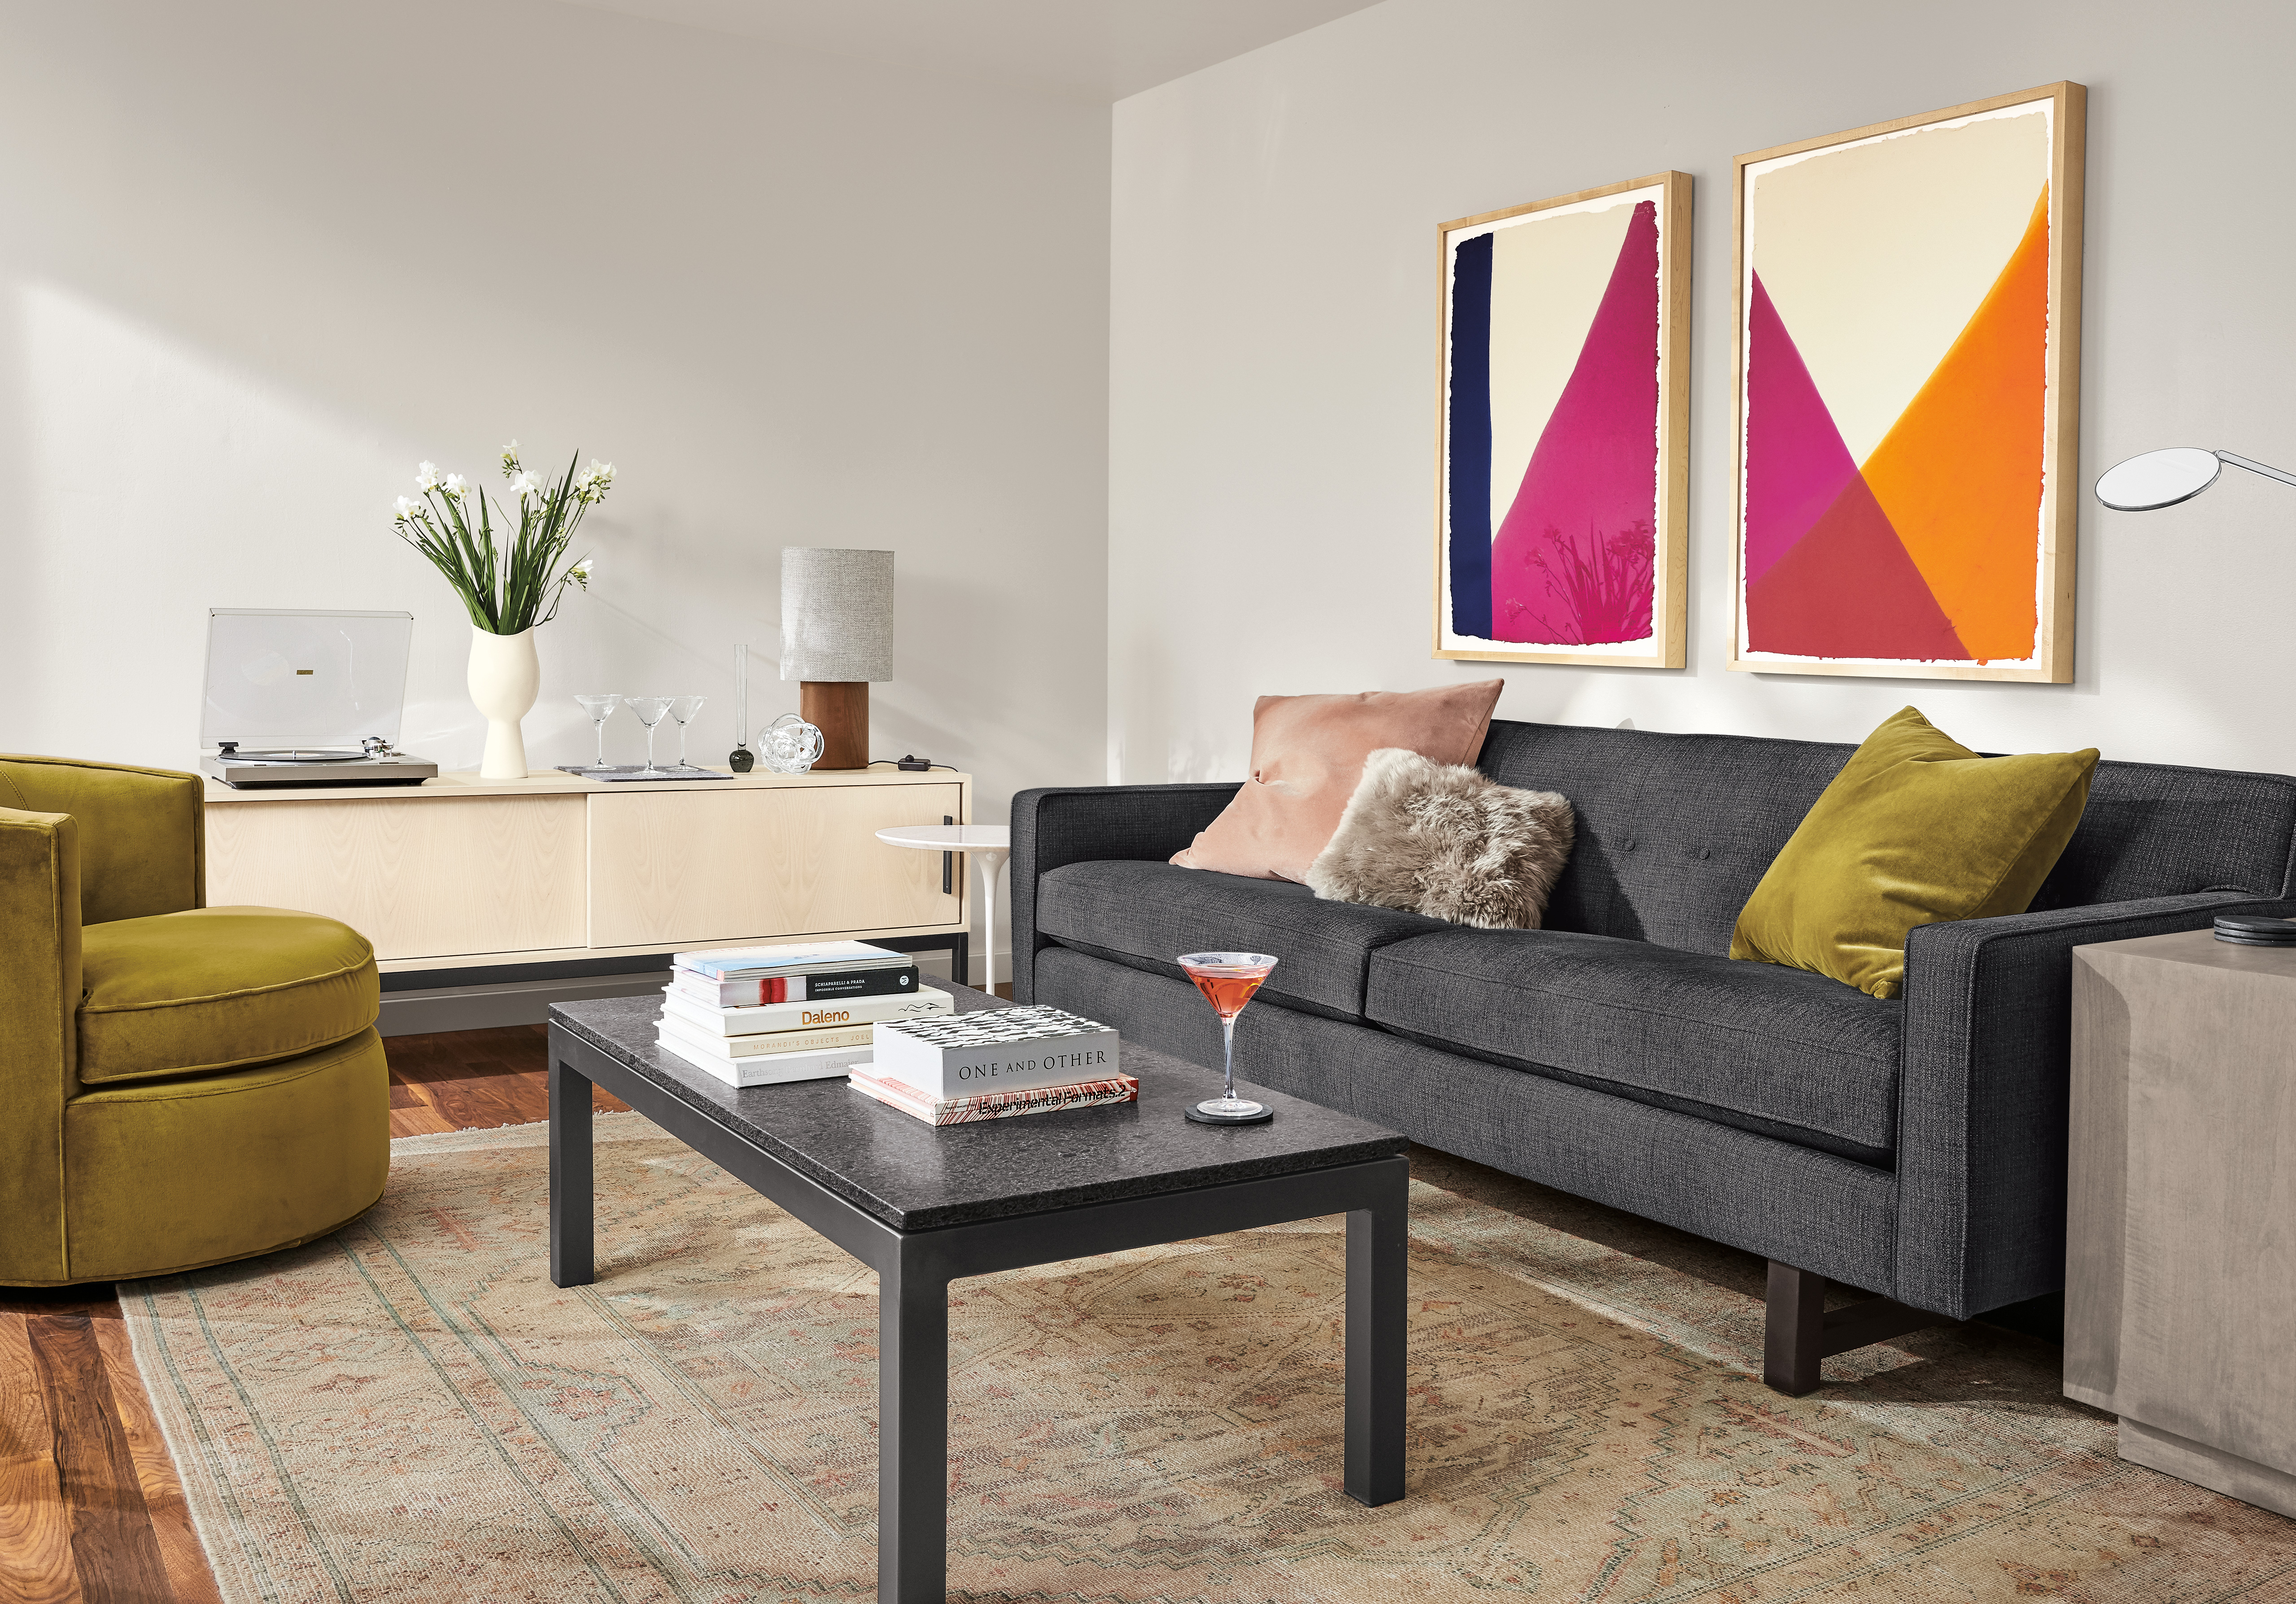 Living Room Art Decor: Bring Color To Your Home